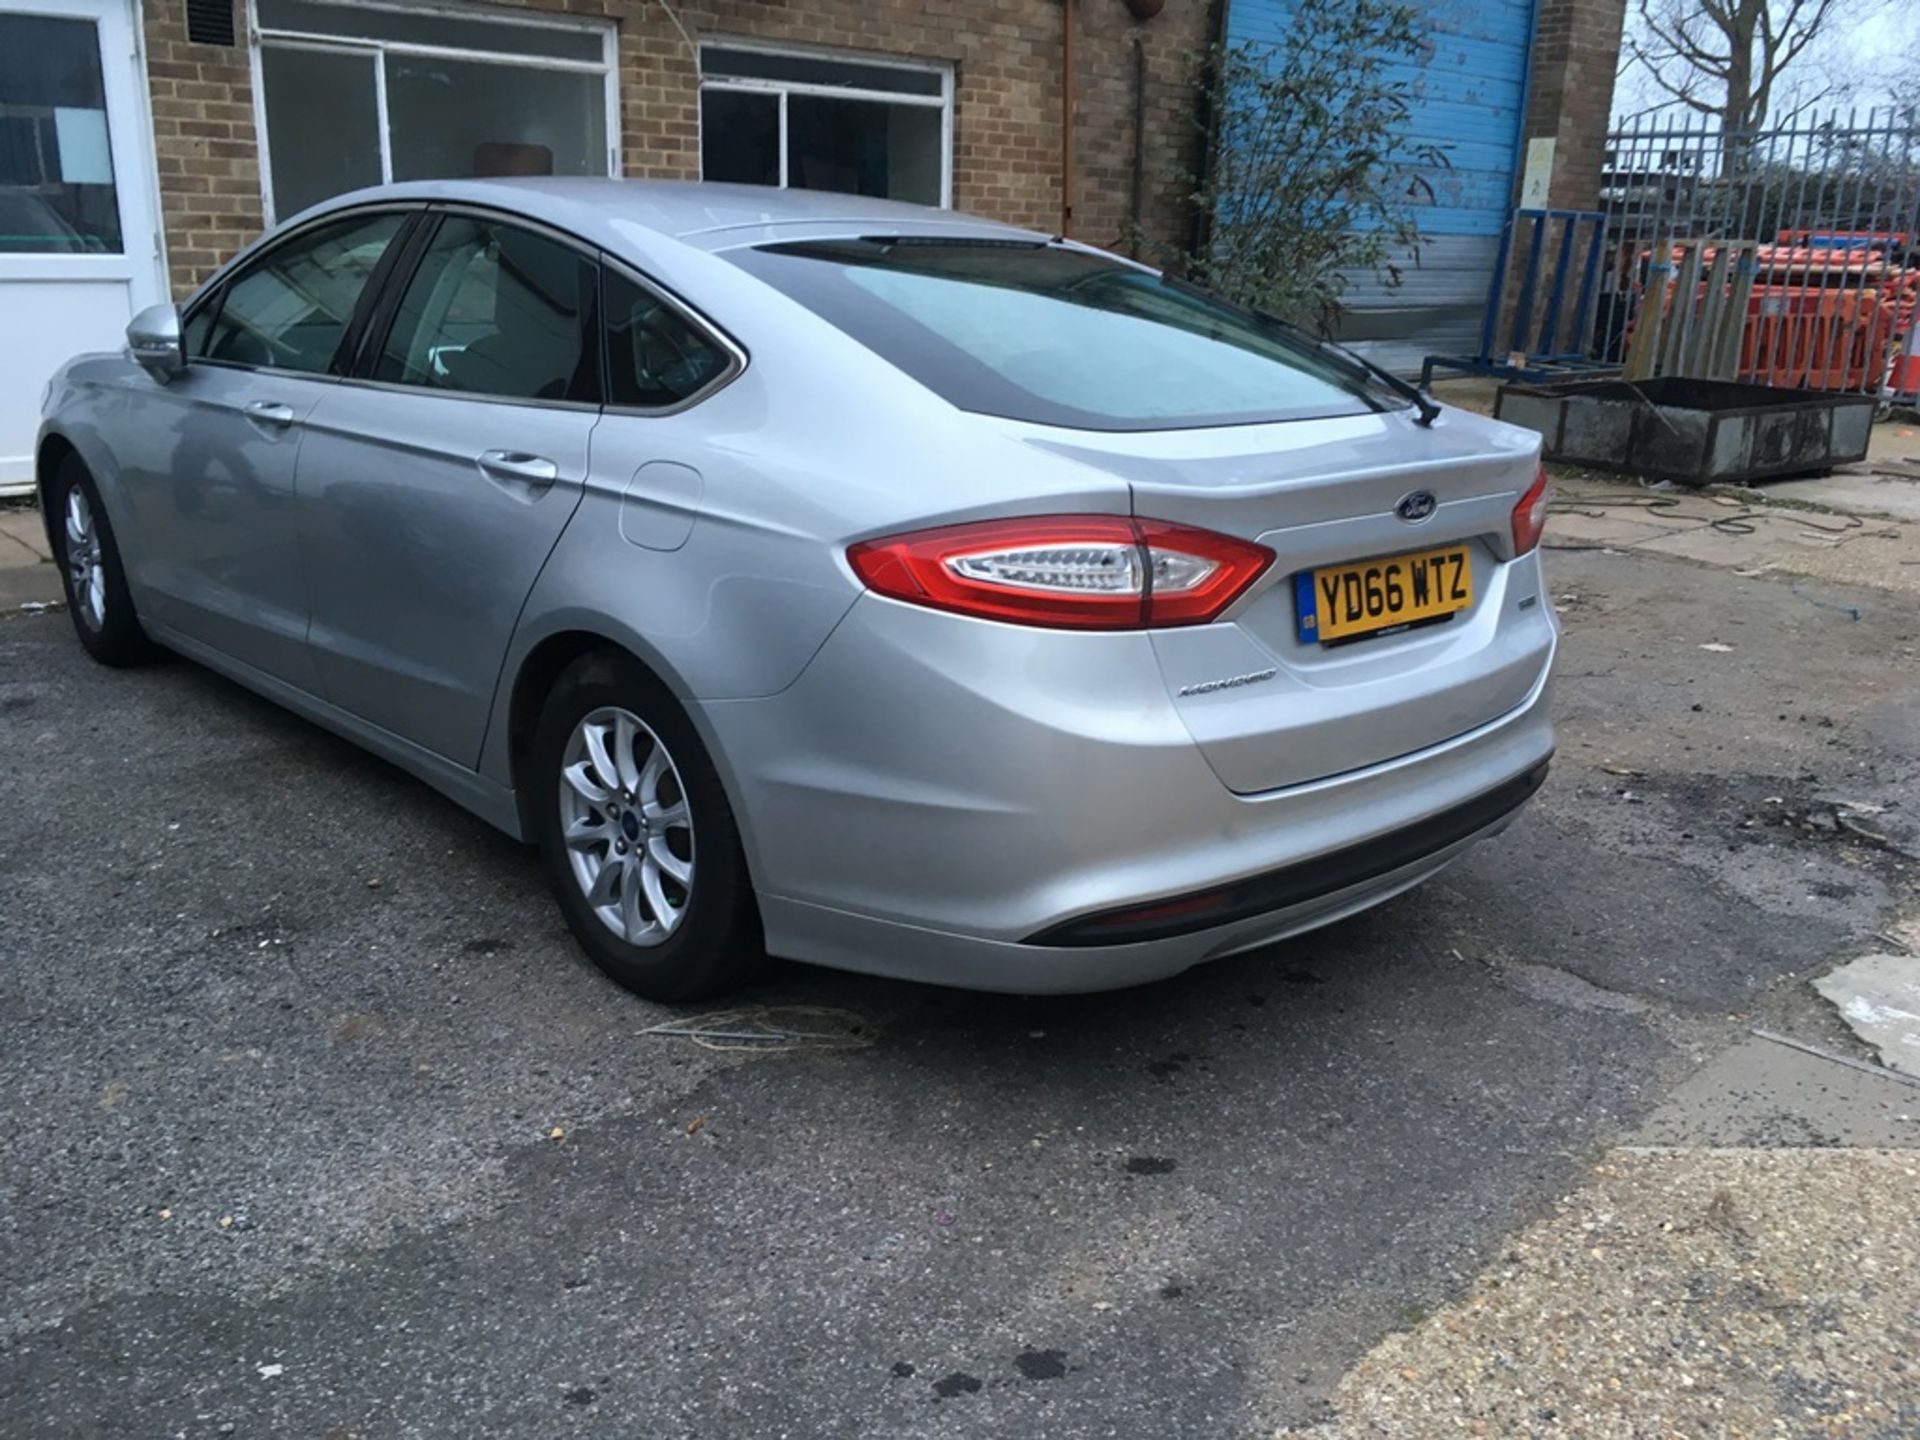 Ford Mondeo Zetec 1.5 litre TDCi 120ps Econetic diesel manual car, Registration: YD66 WTZ, Year of - Image 3 of 14